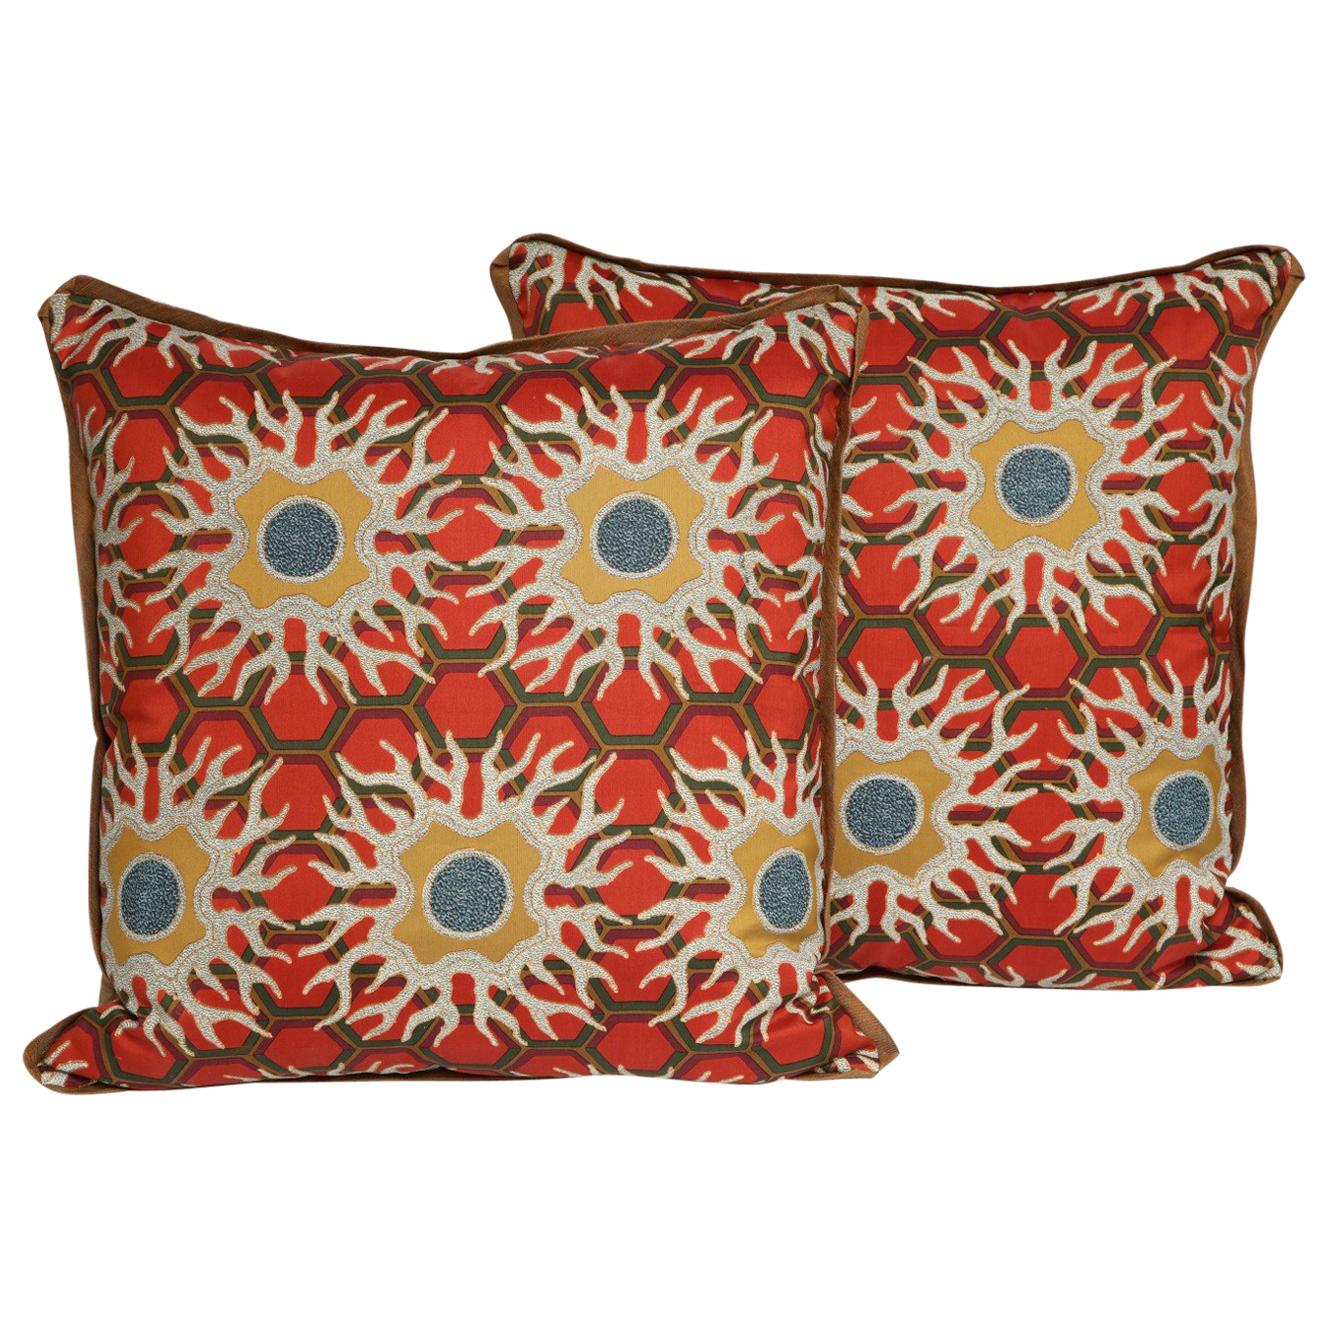 A Pair of Tony Duquette Cushions